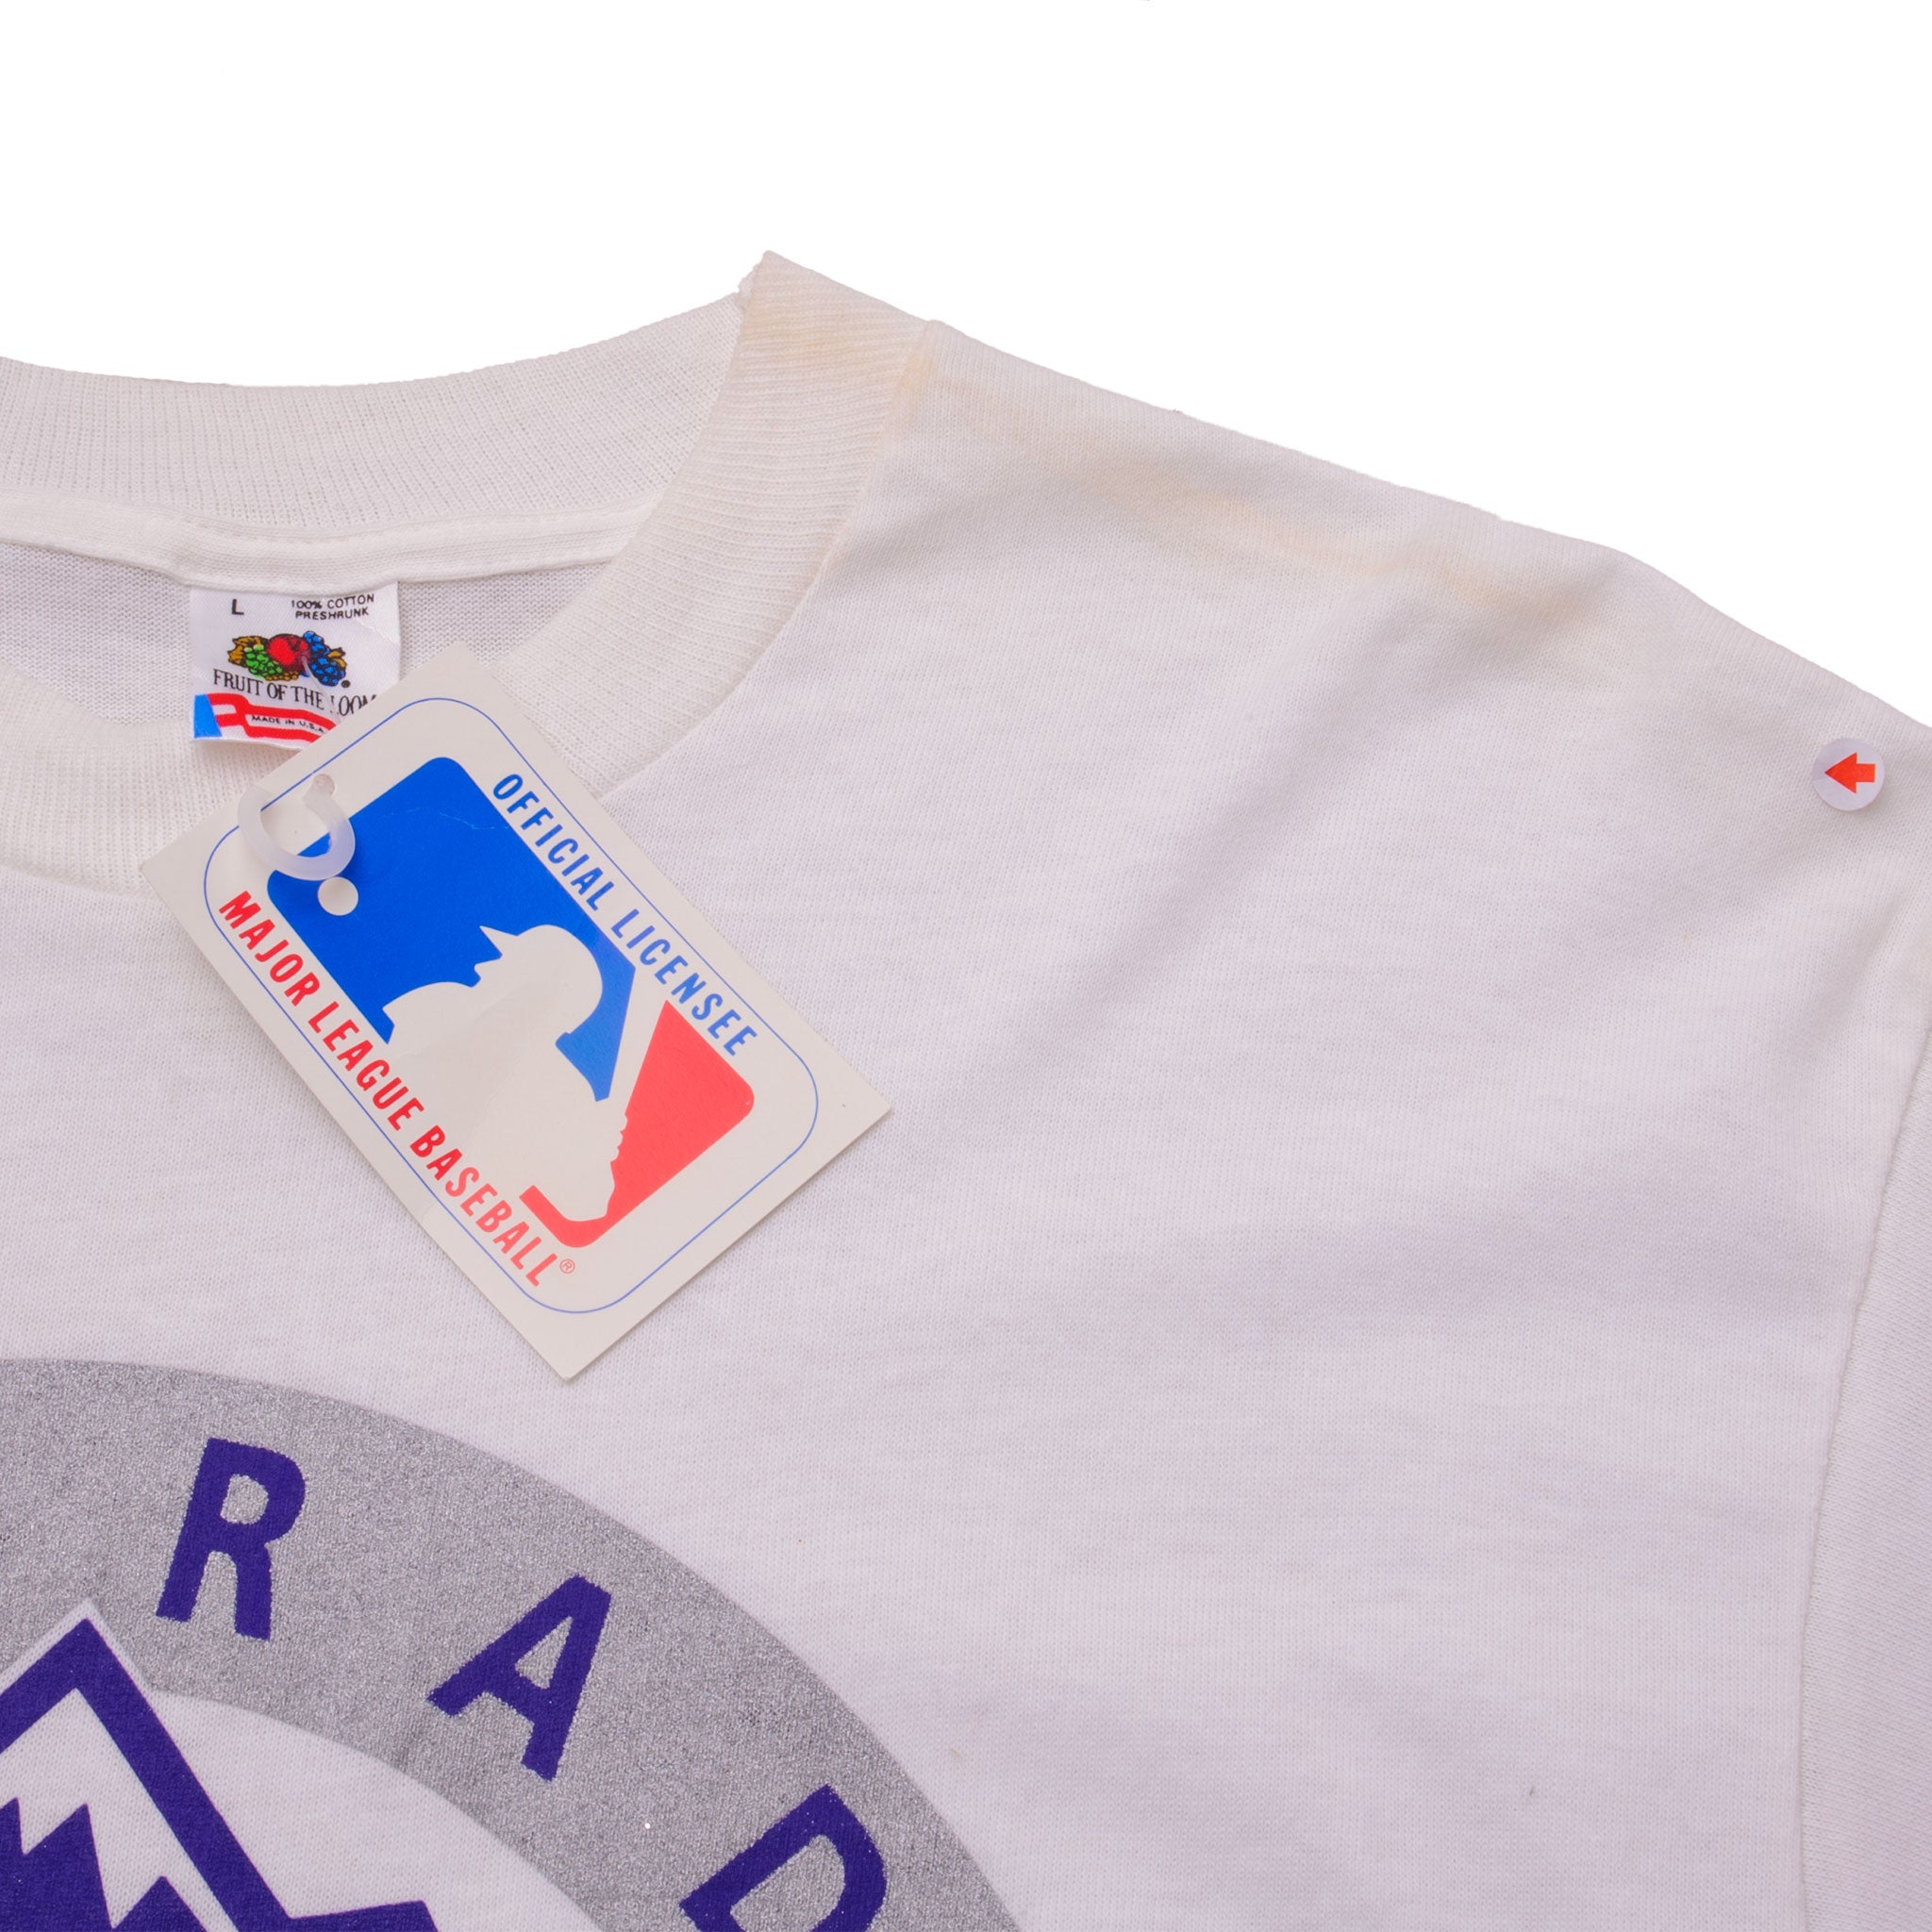 1991 Mets Baseball T-Shirt – Red Vintage Co